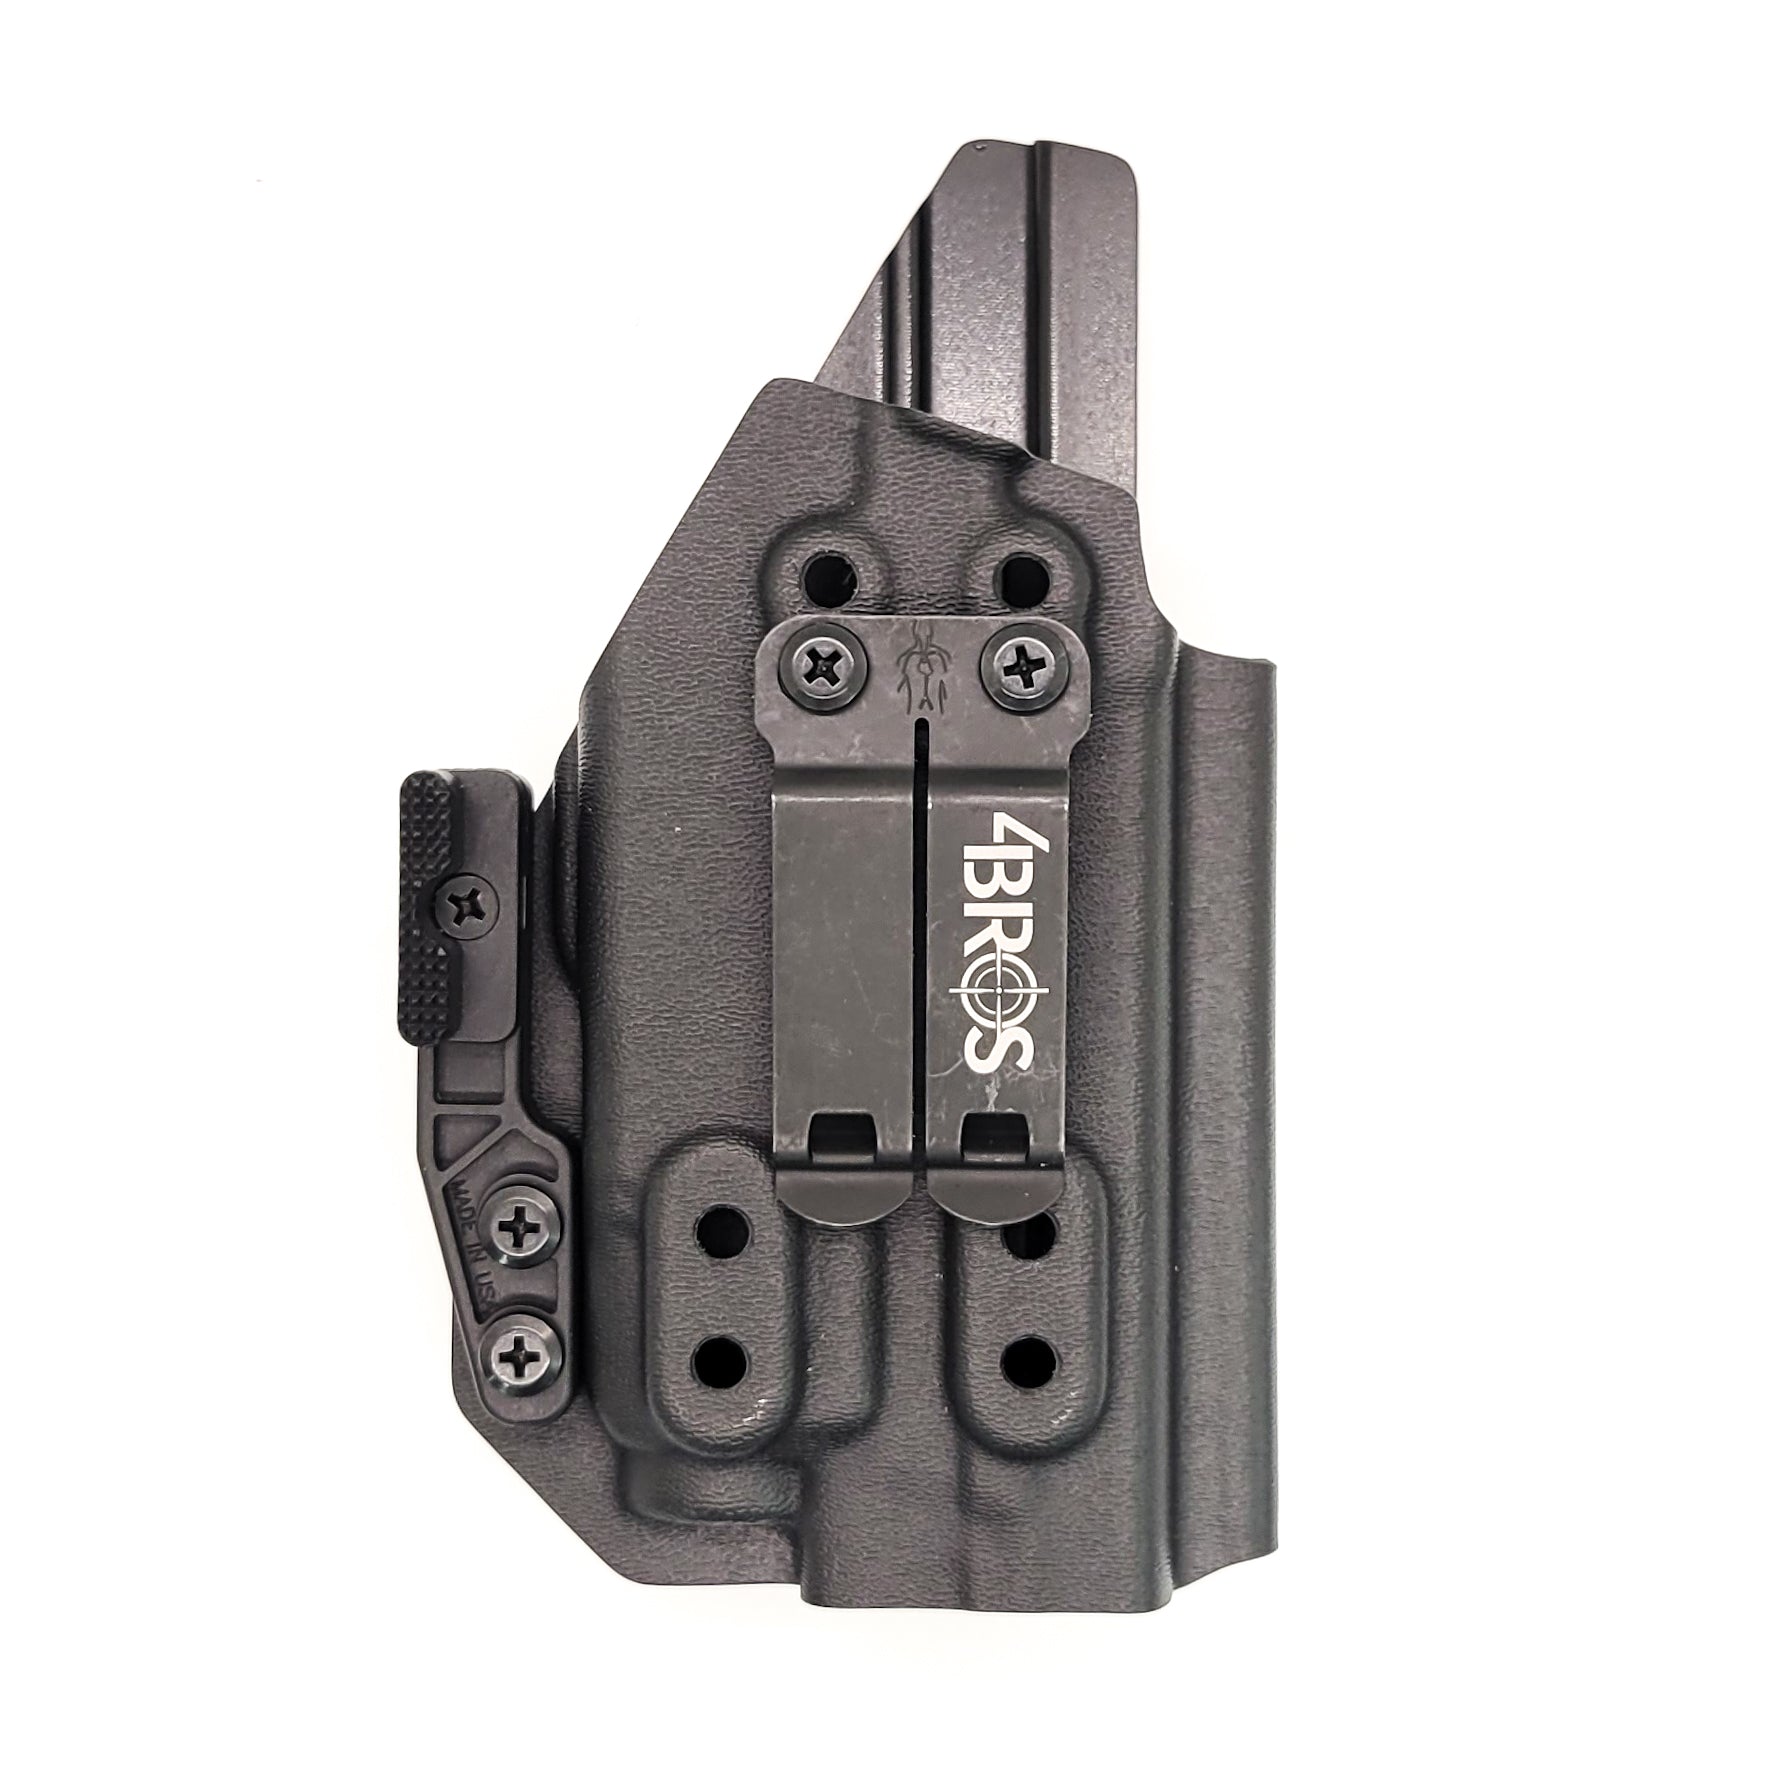 Best Inside Waistband IWB AIWB Kydex Holster designed to fit the Smith & Wesson M&P Compact 9mm 4" pistols with the Streamlight TLR-7 or TLR-7A light mounted to the pistol. Full sweat guard, adjustable retention, minimal material & smooth edges to reduce printing. Cleared for red dot sights. Proudly made in the USA. 